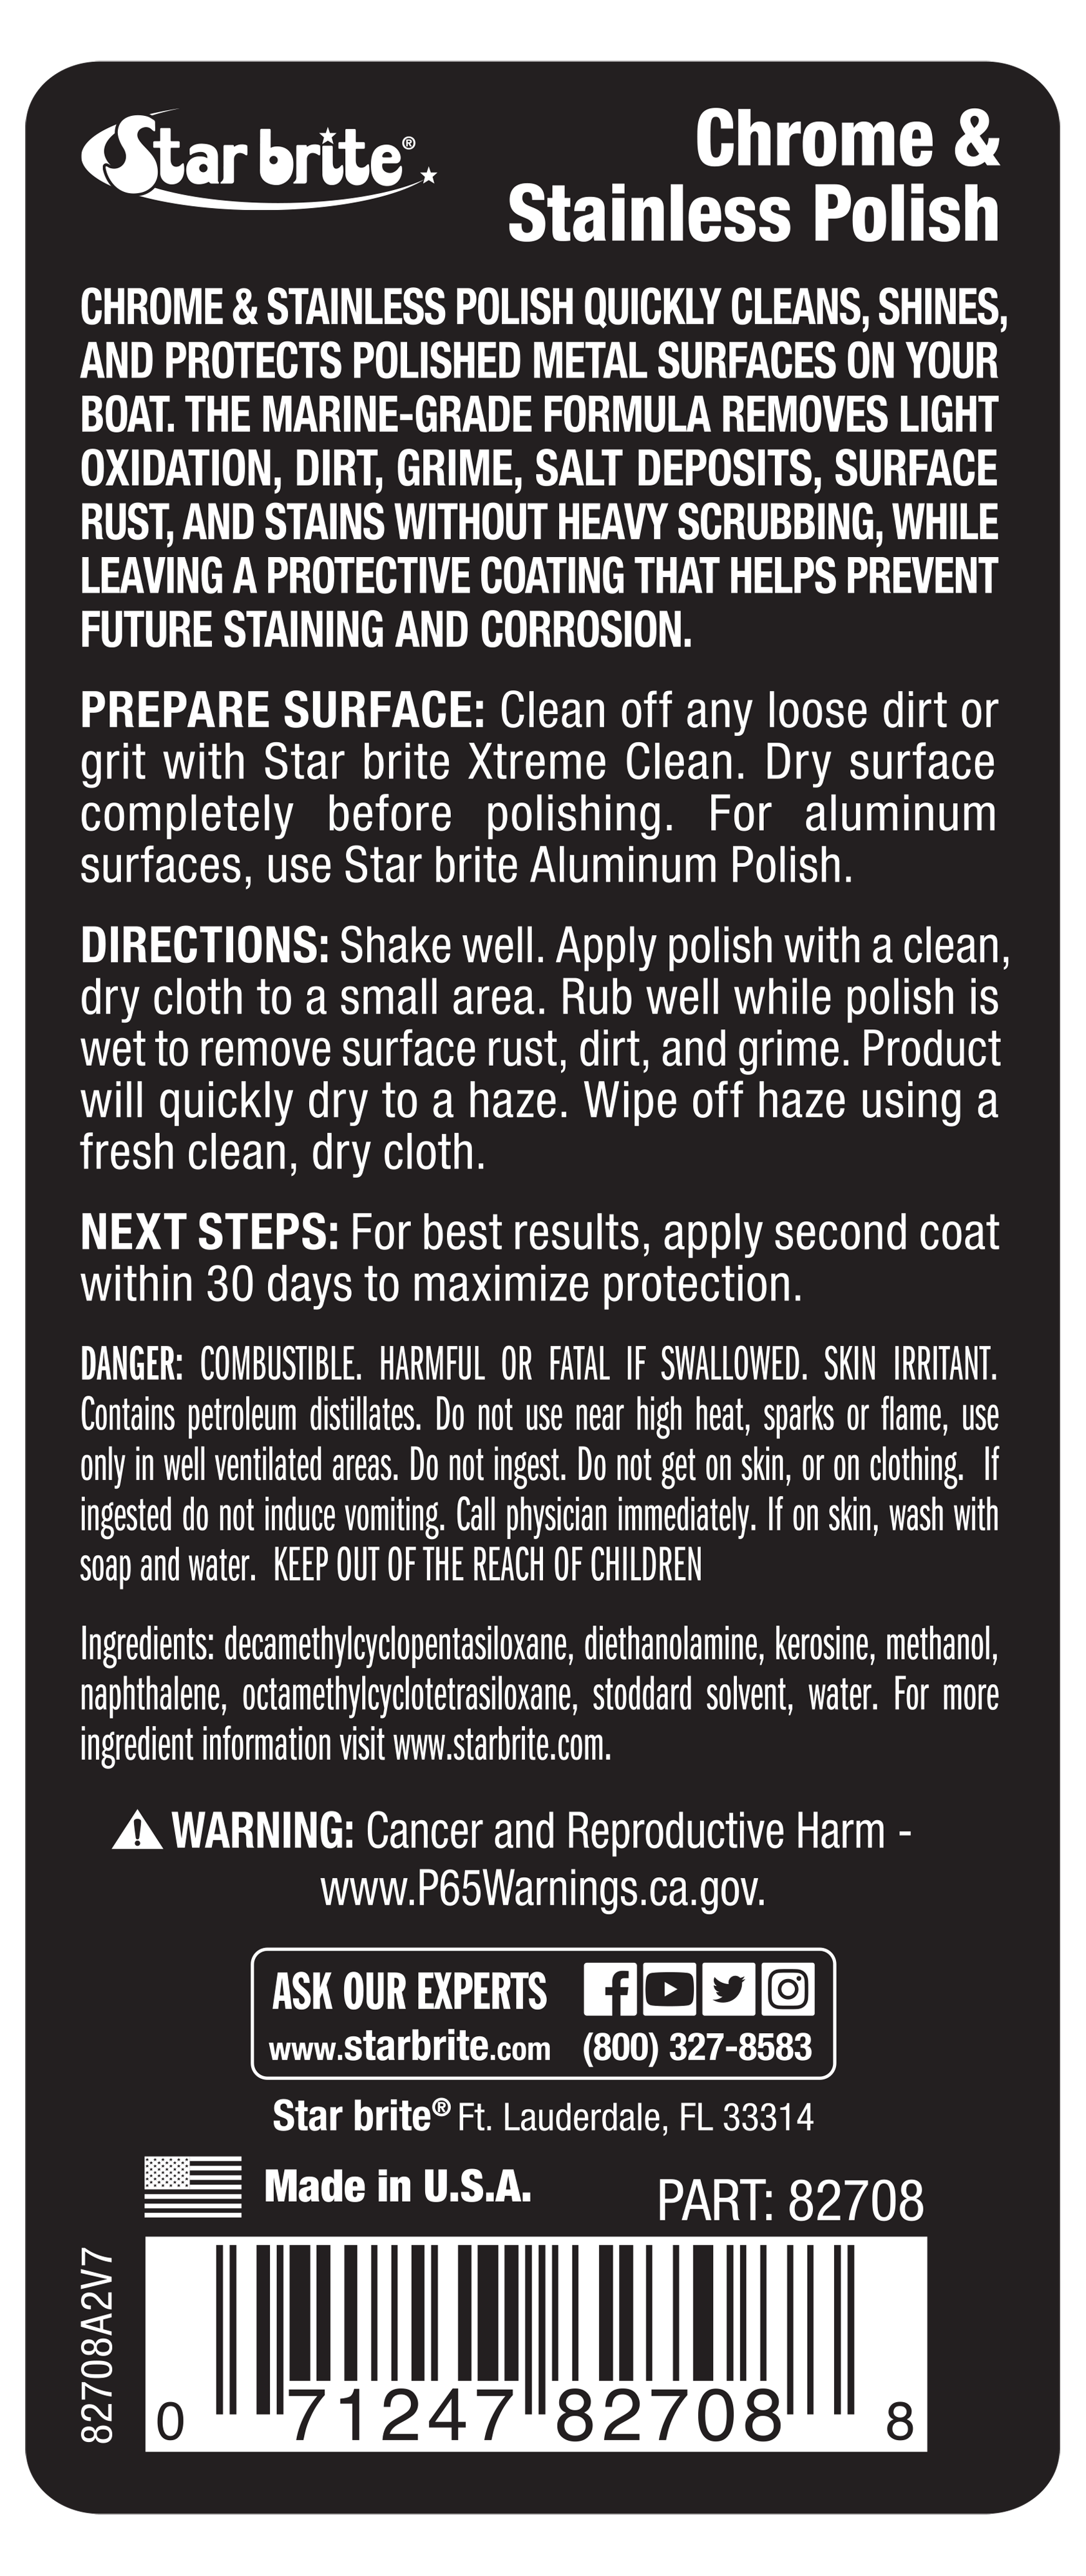 Brite Stainless Steel Cleaner – Dynamic Chemicals and Supplies